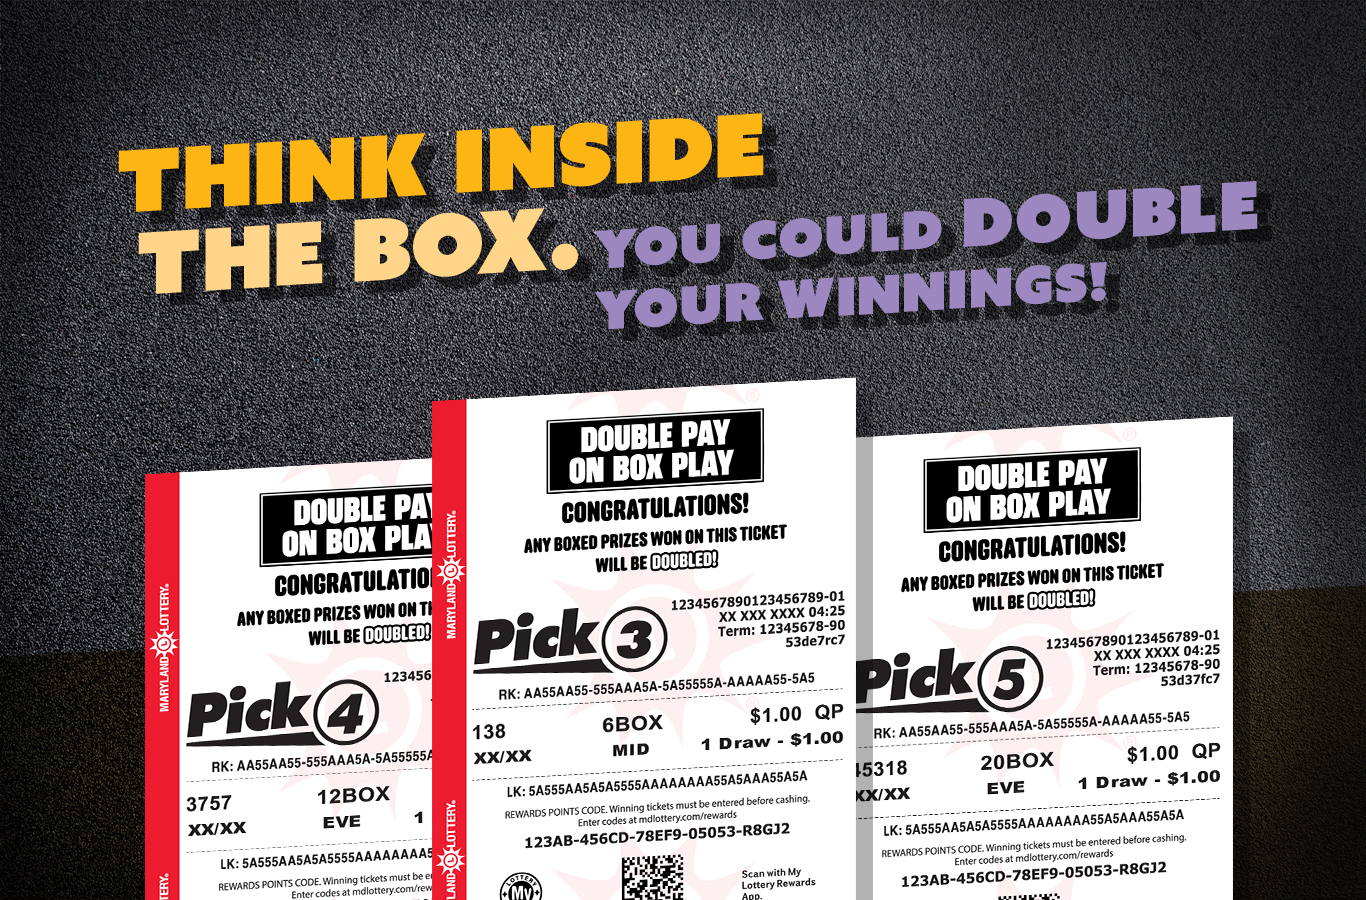 Twice the cash. Double the fun! Box your numbers when you play Pick 3, Pick 4, or Pick 5 through 3/10 for a chance at a double payout.